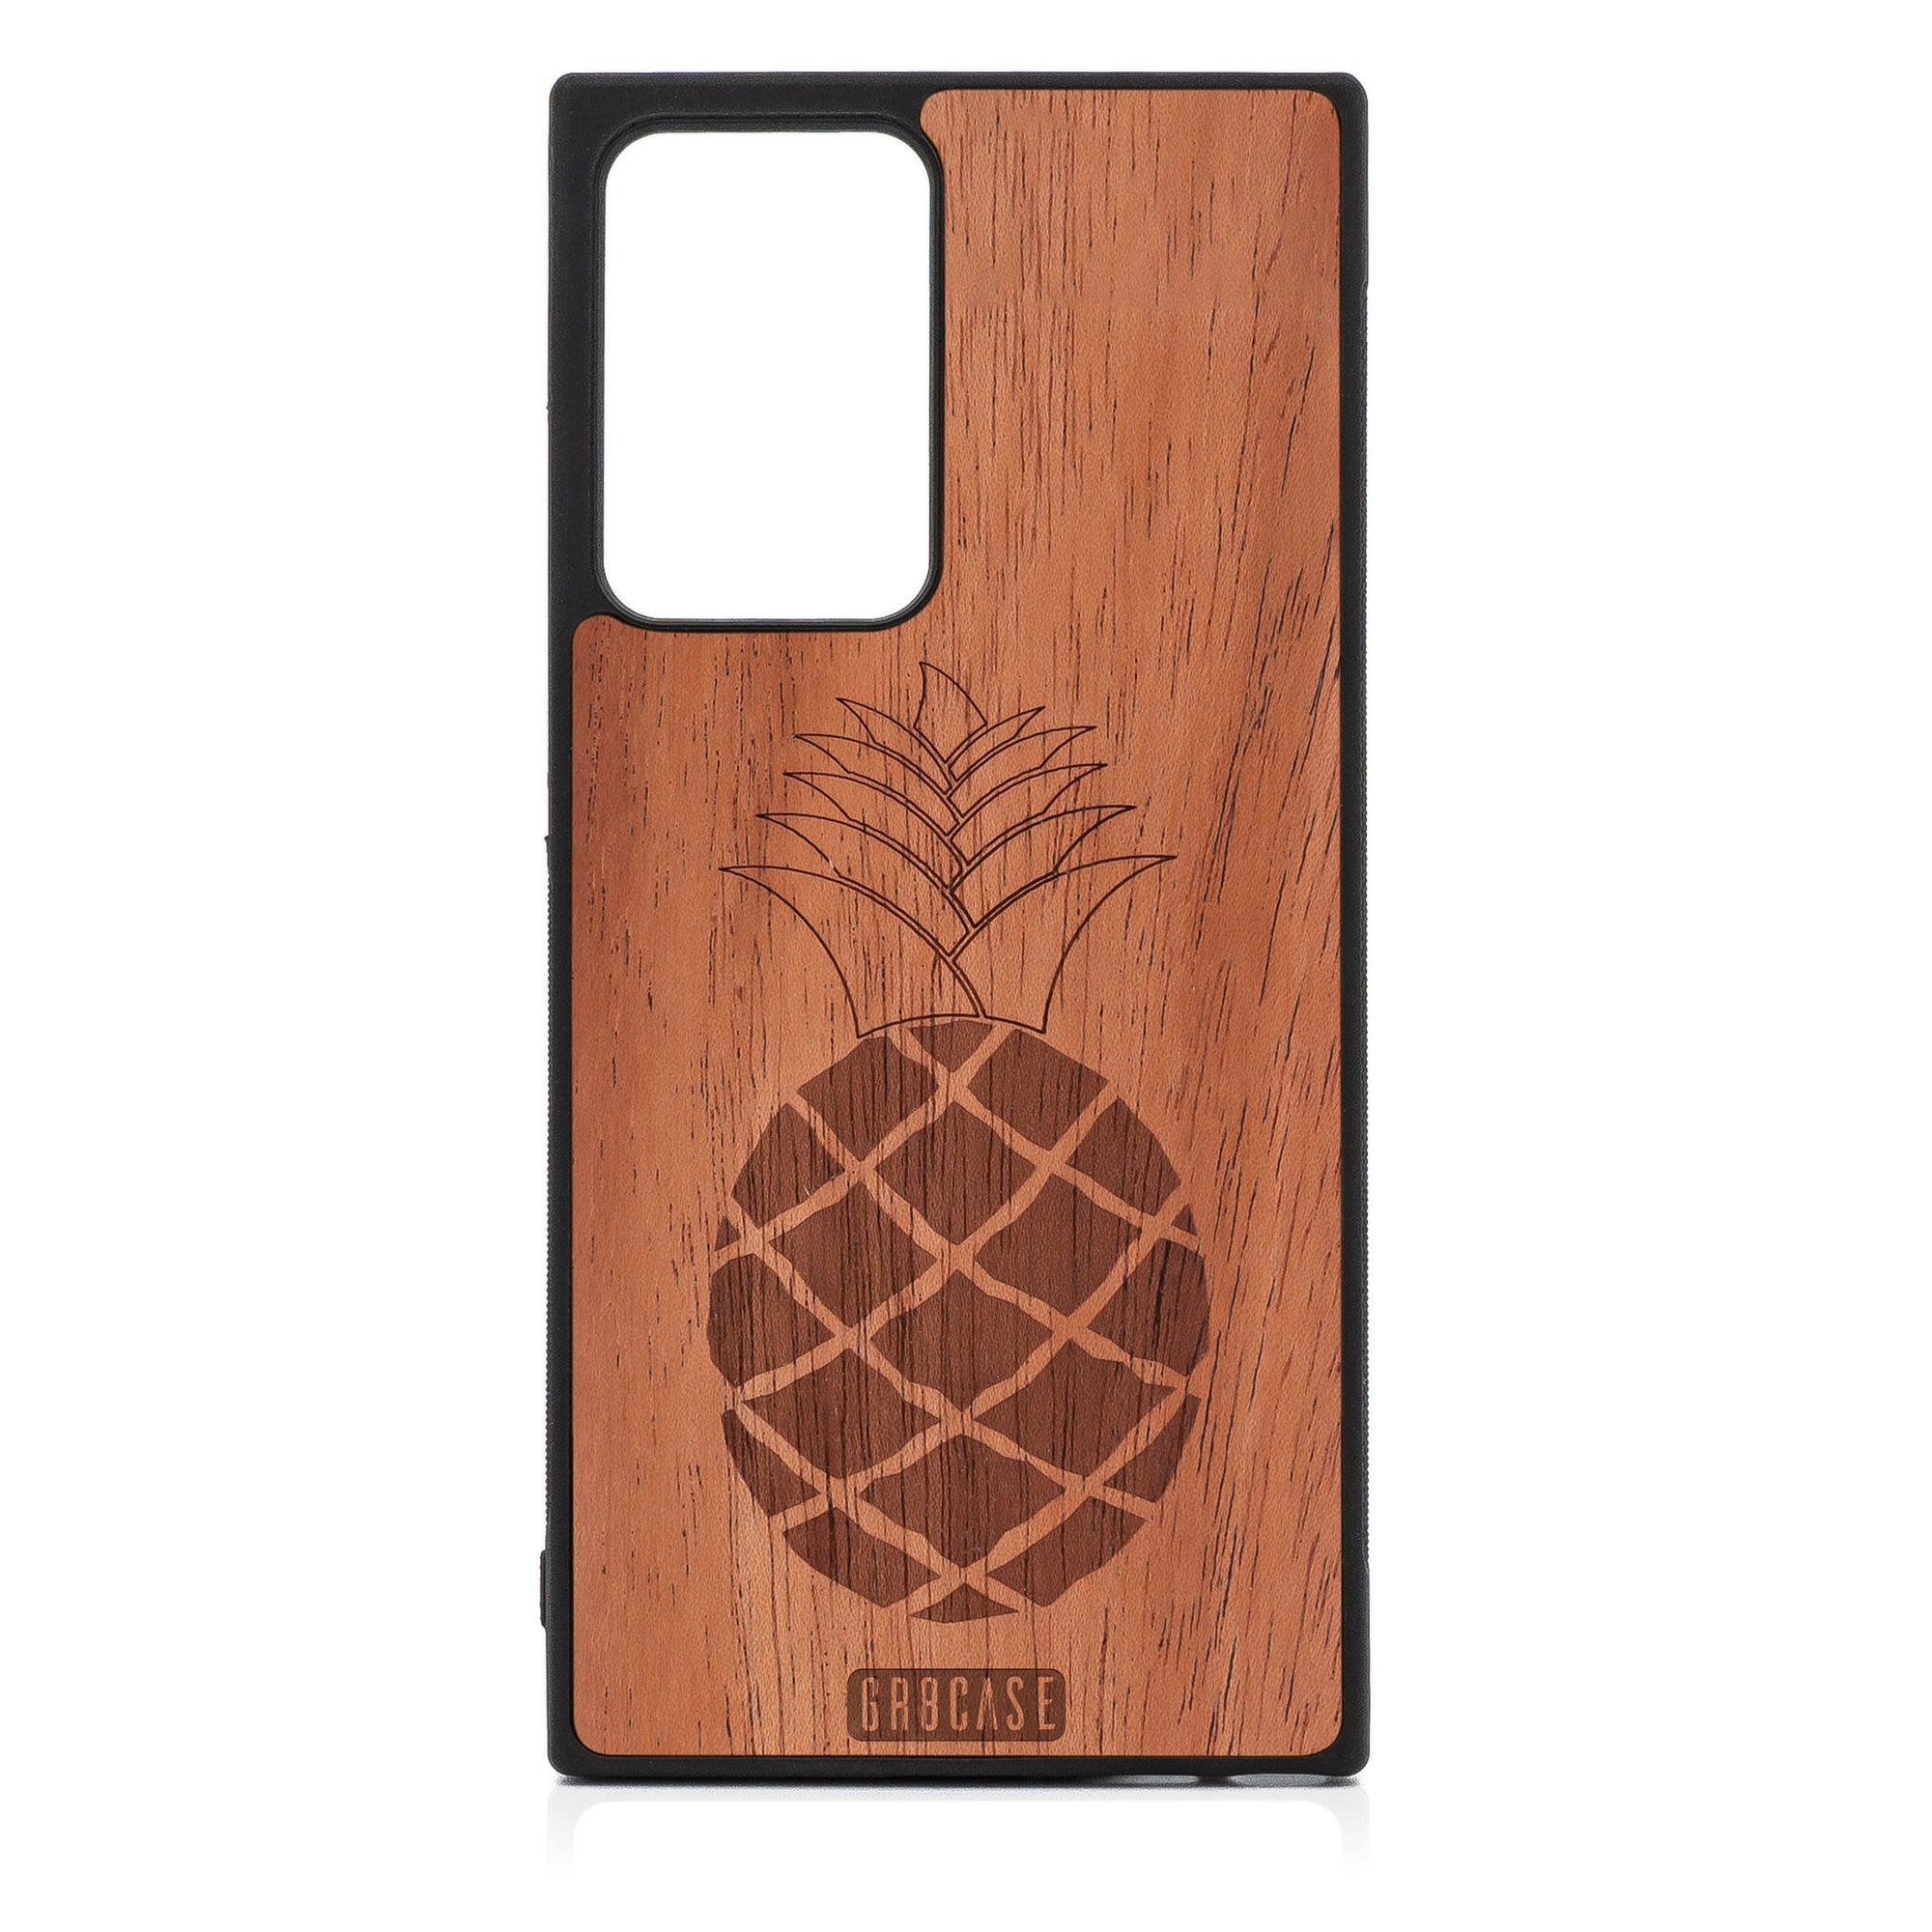 Pineapple Design Wood Case For Samsung Galaxy Note 20 Ultra